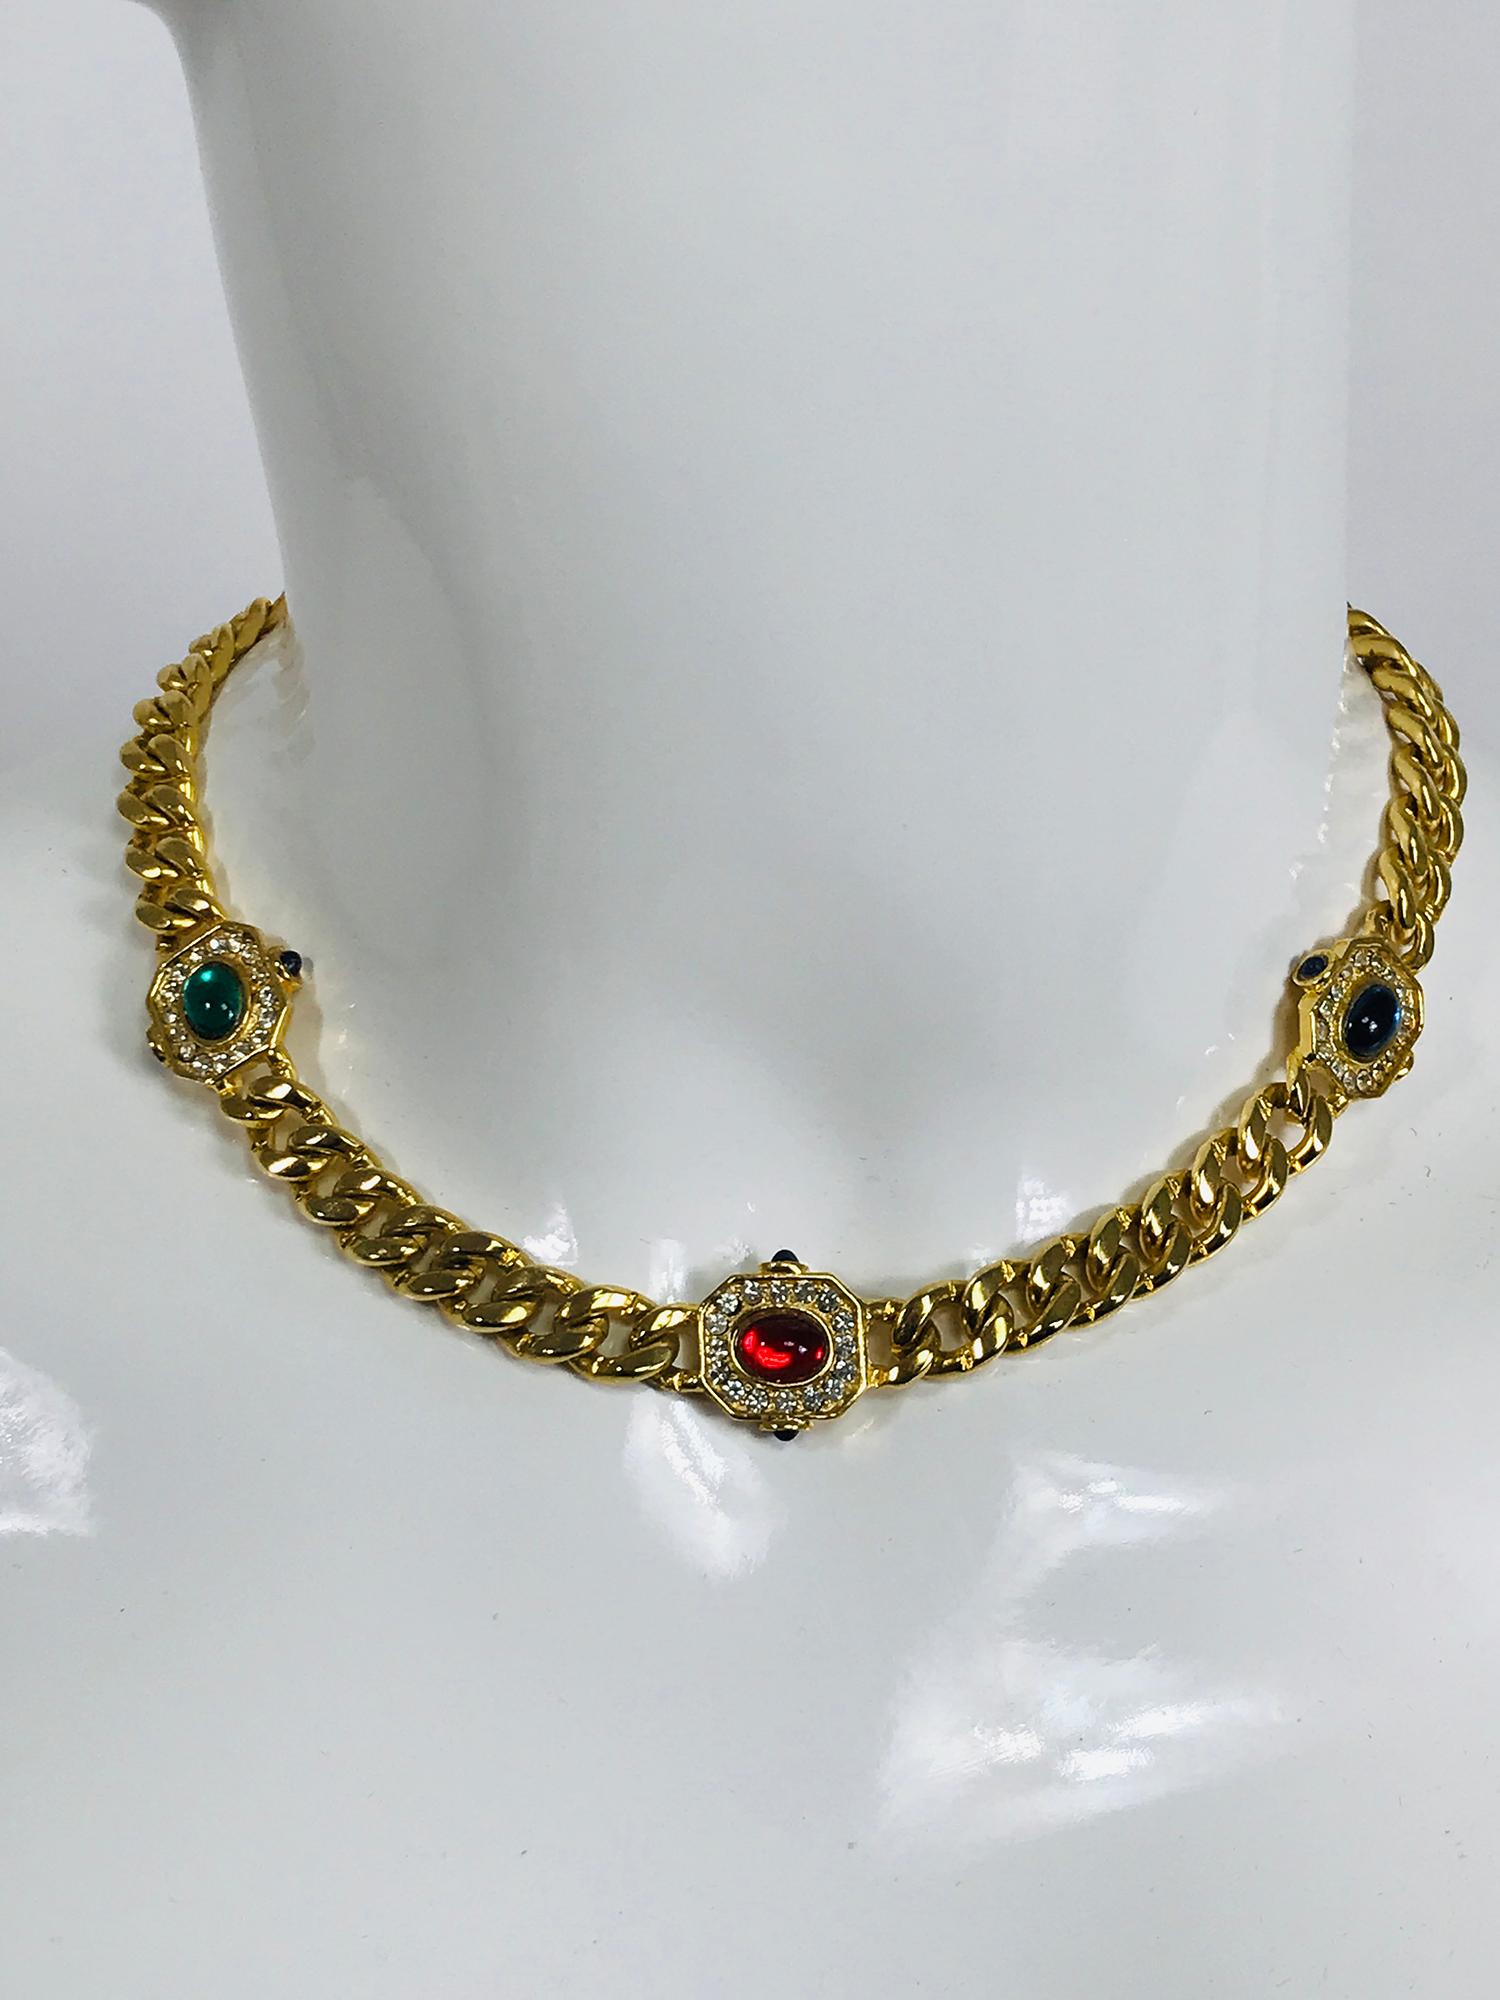 Vintage faux jewel chunky gold metal choker necklace from the 1990s. Well made costume jewel necklace with three cabochon of faux sapphire, emerald and ruby with crystal rhinestones. In very good vintage condition Necklace closes at the back with a